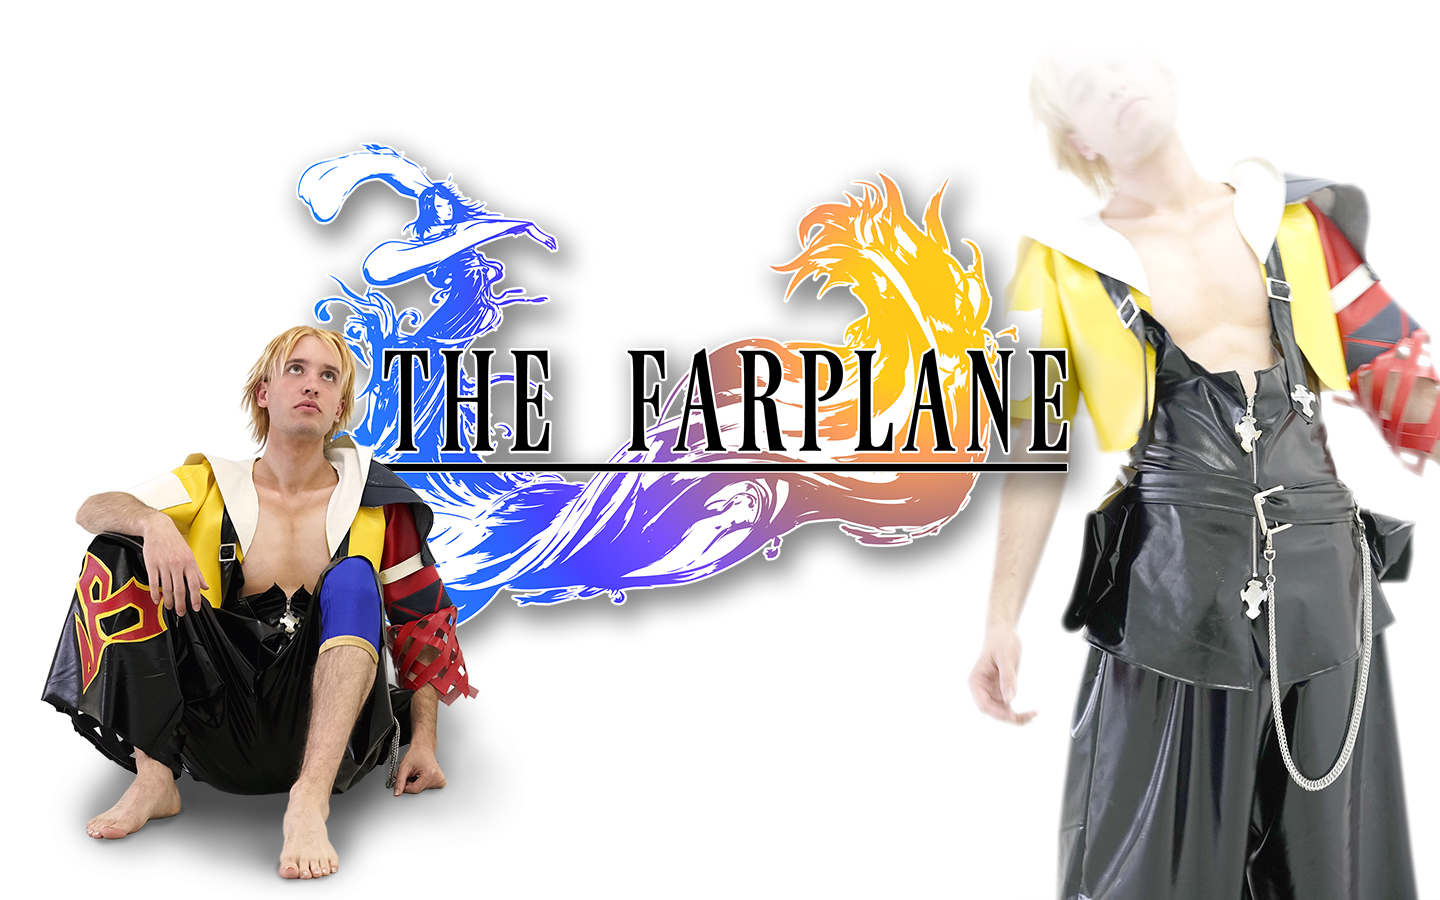 Jesse dressed as Tidus from Final Fantasy 10 sitting on the left and standing on the right with text that reads 'The Farplane'